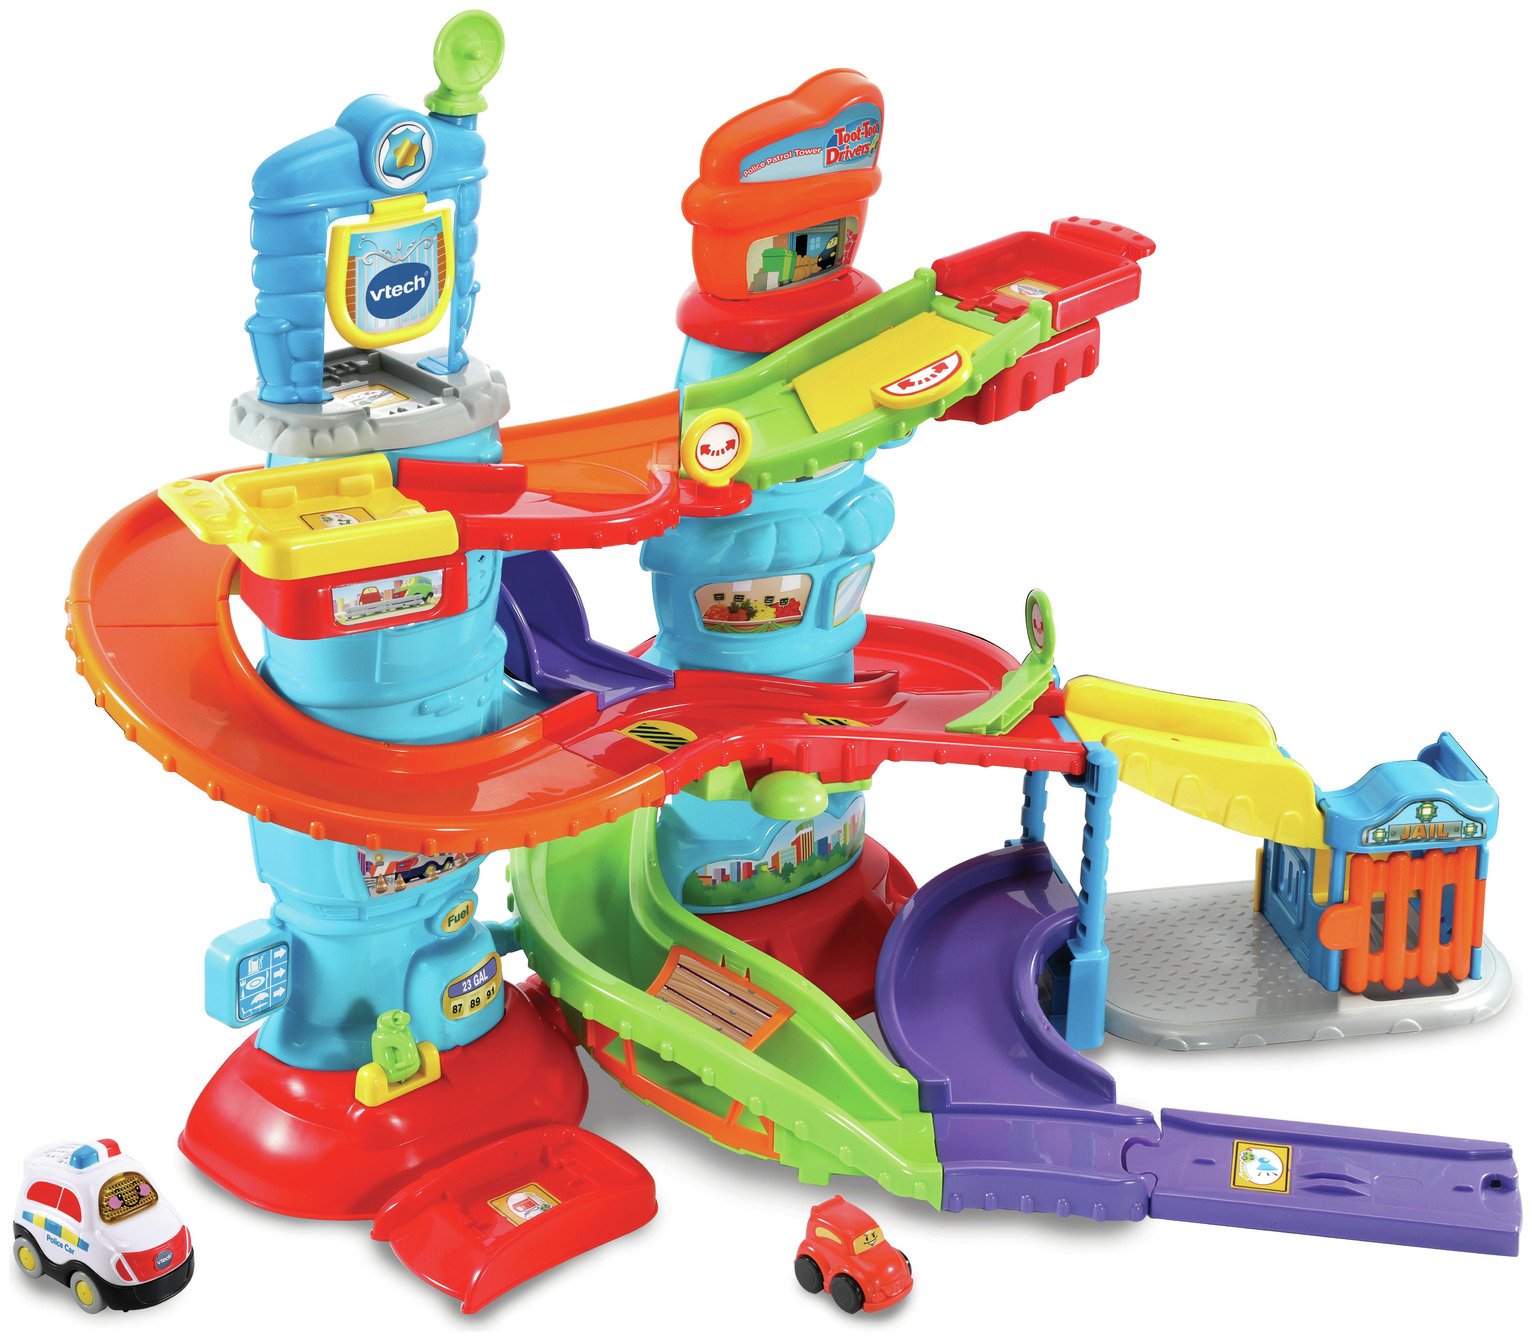 VTech Toot Toot Police Patrol Tower